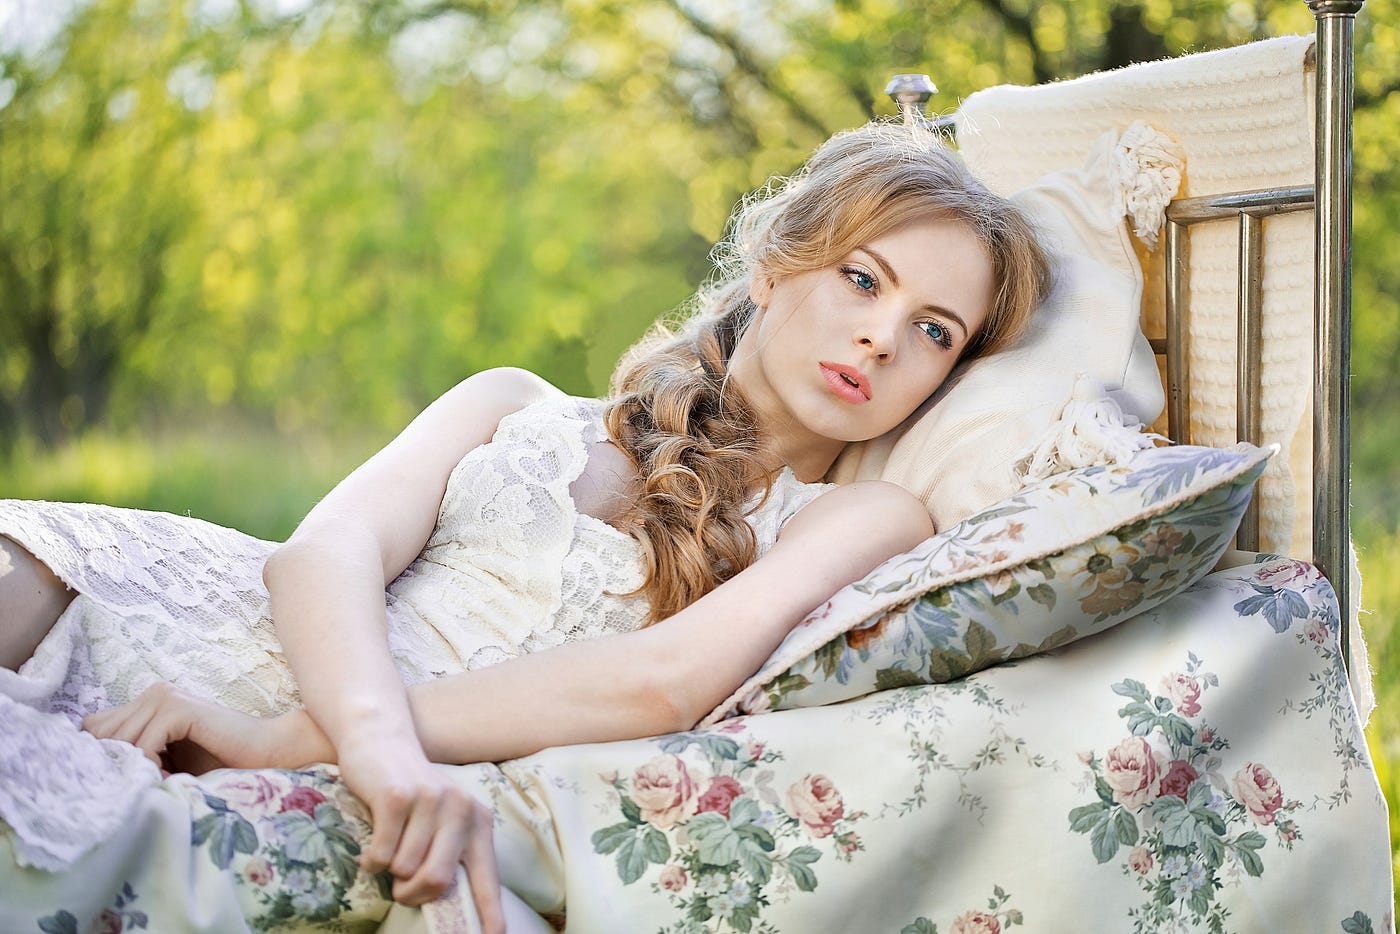 Young woman wearing white dress reclines on a bed with flowered sheets. She looks pensive.